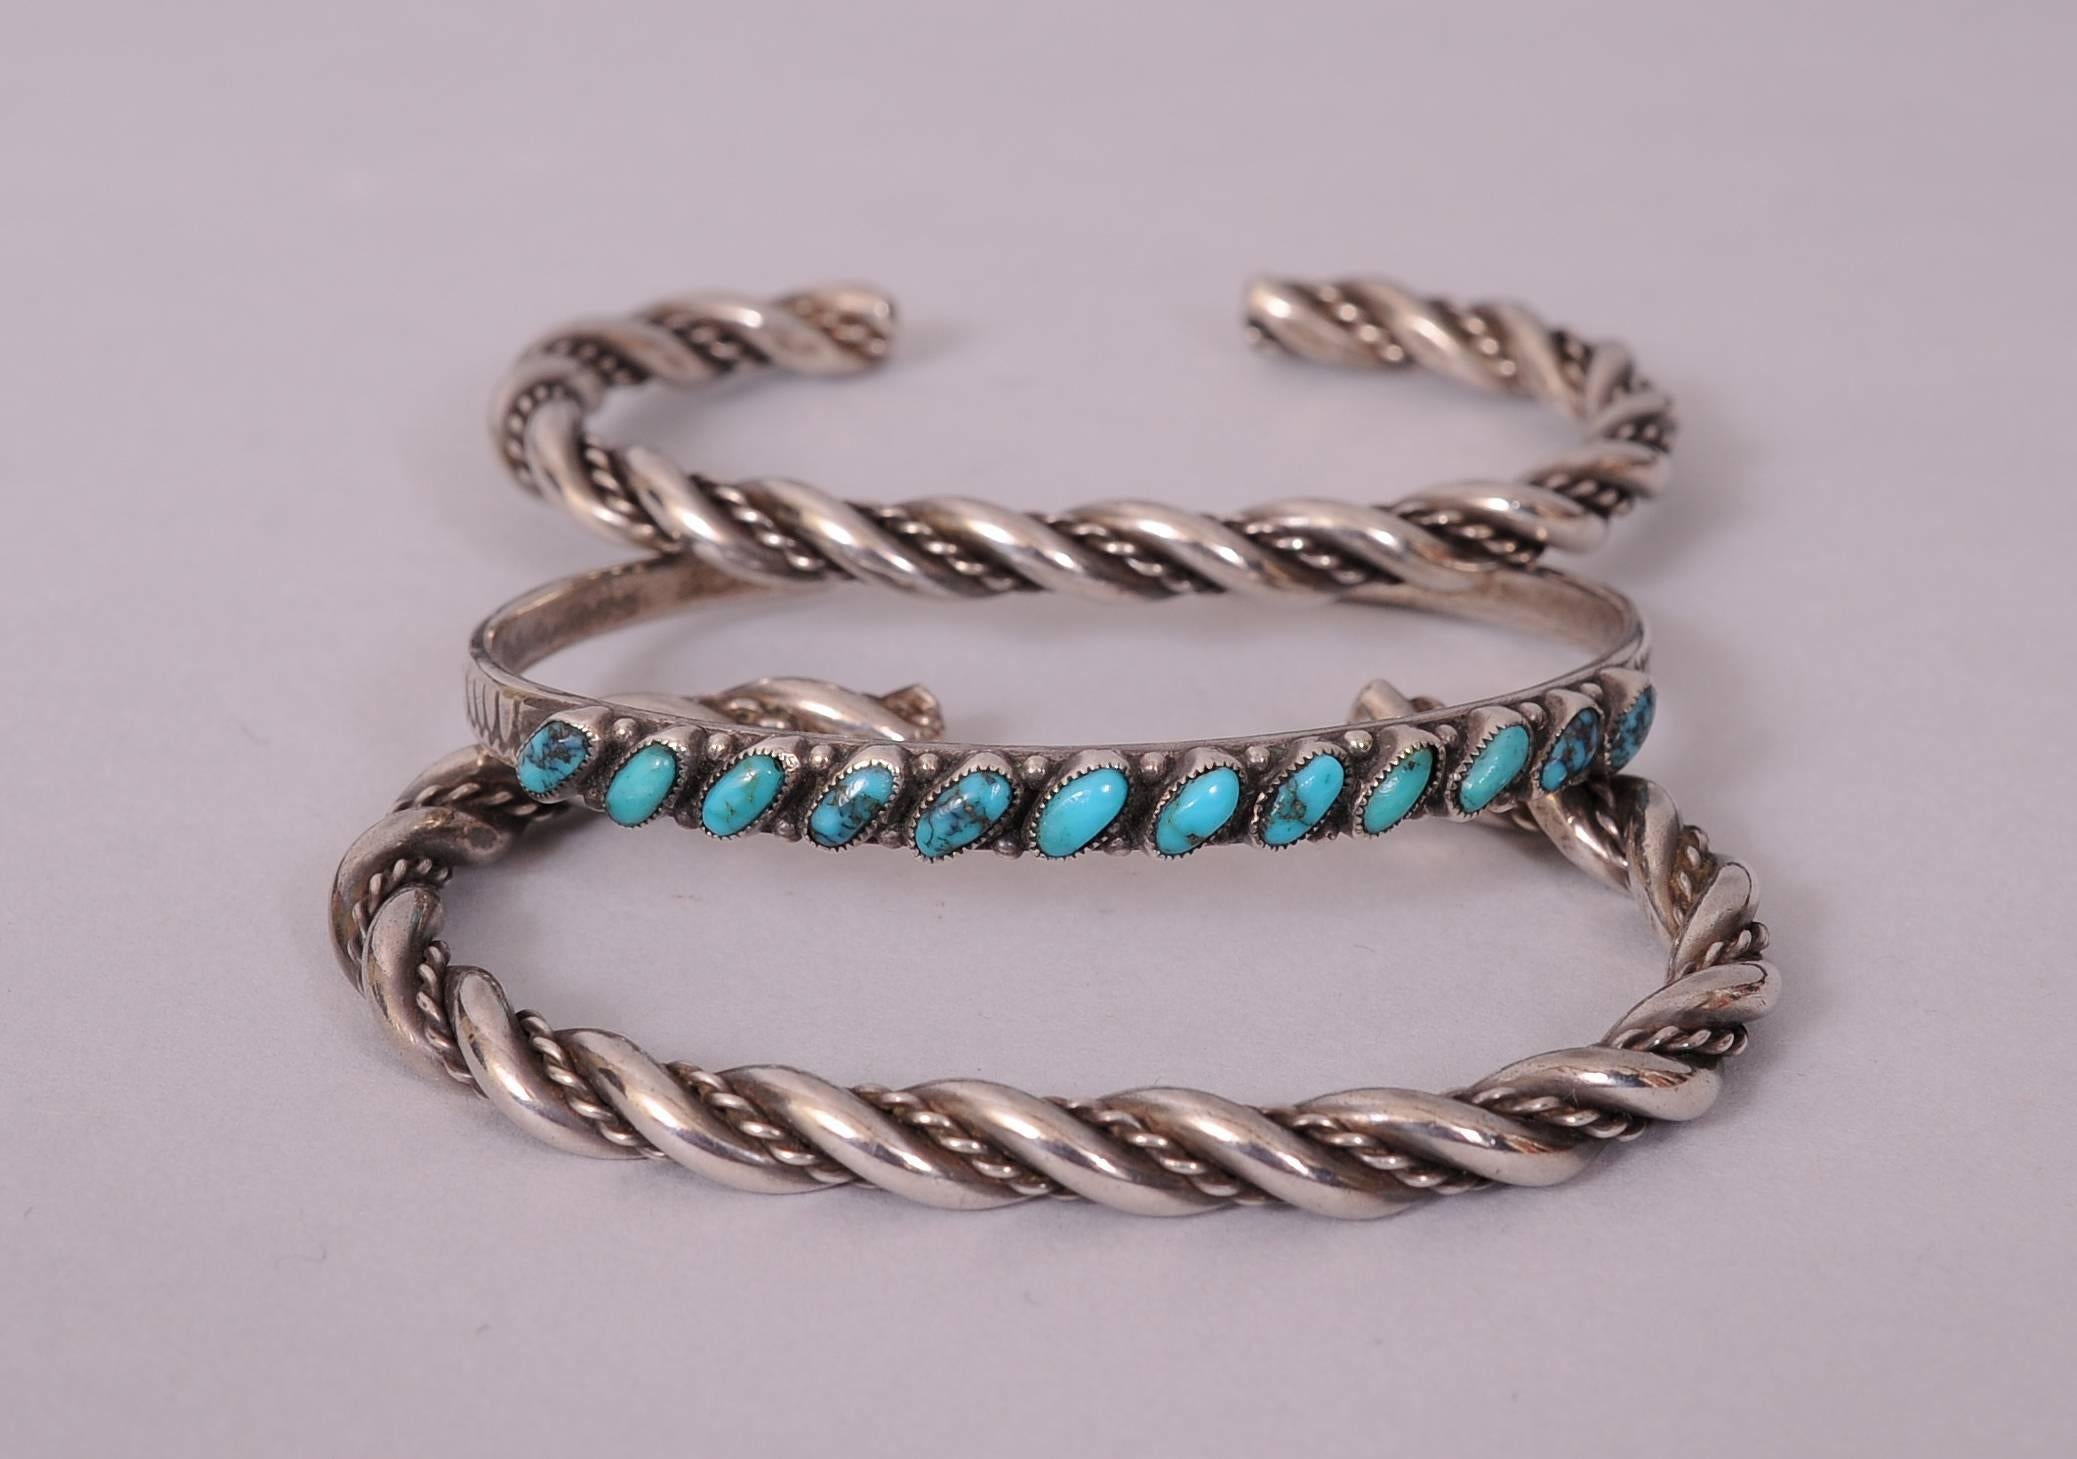 A pair of Native American silver twist bracelets are combined with a silver and turquoise bracelet for a lovely silver and turquoise stack of bracelets. All three are in excellent condition with a light patina.
Measurements:
Height 1/4